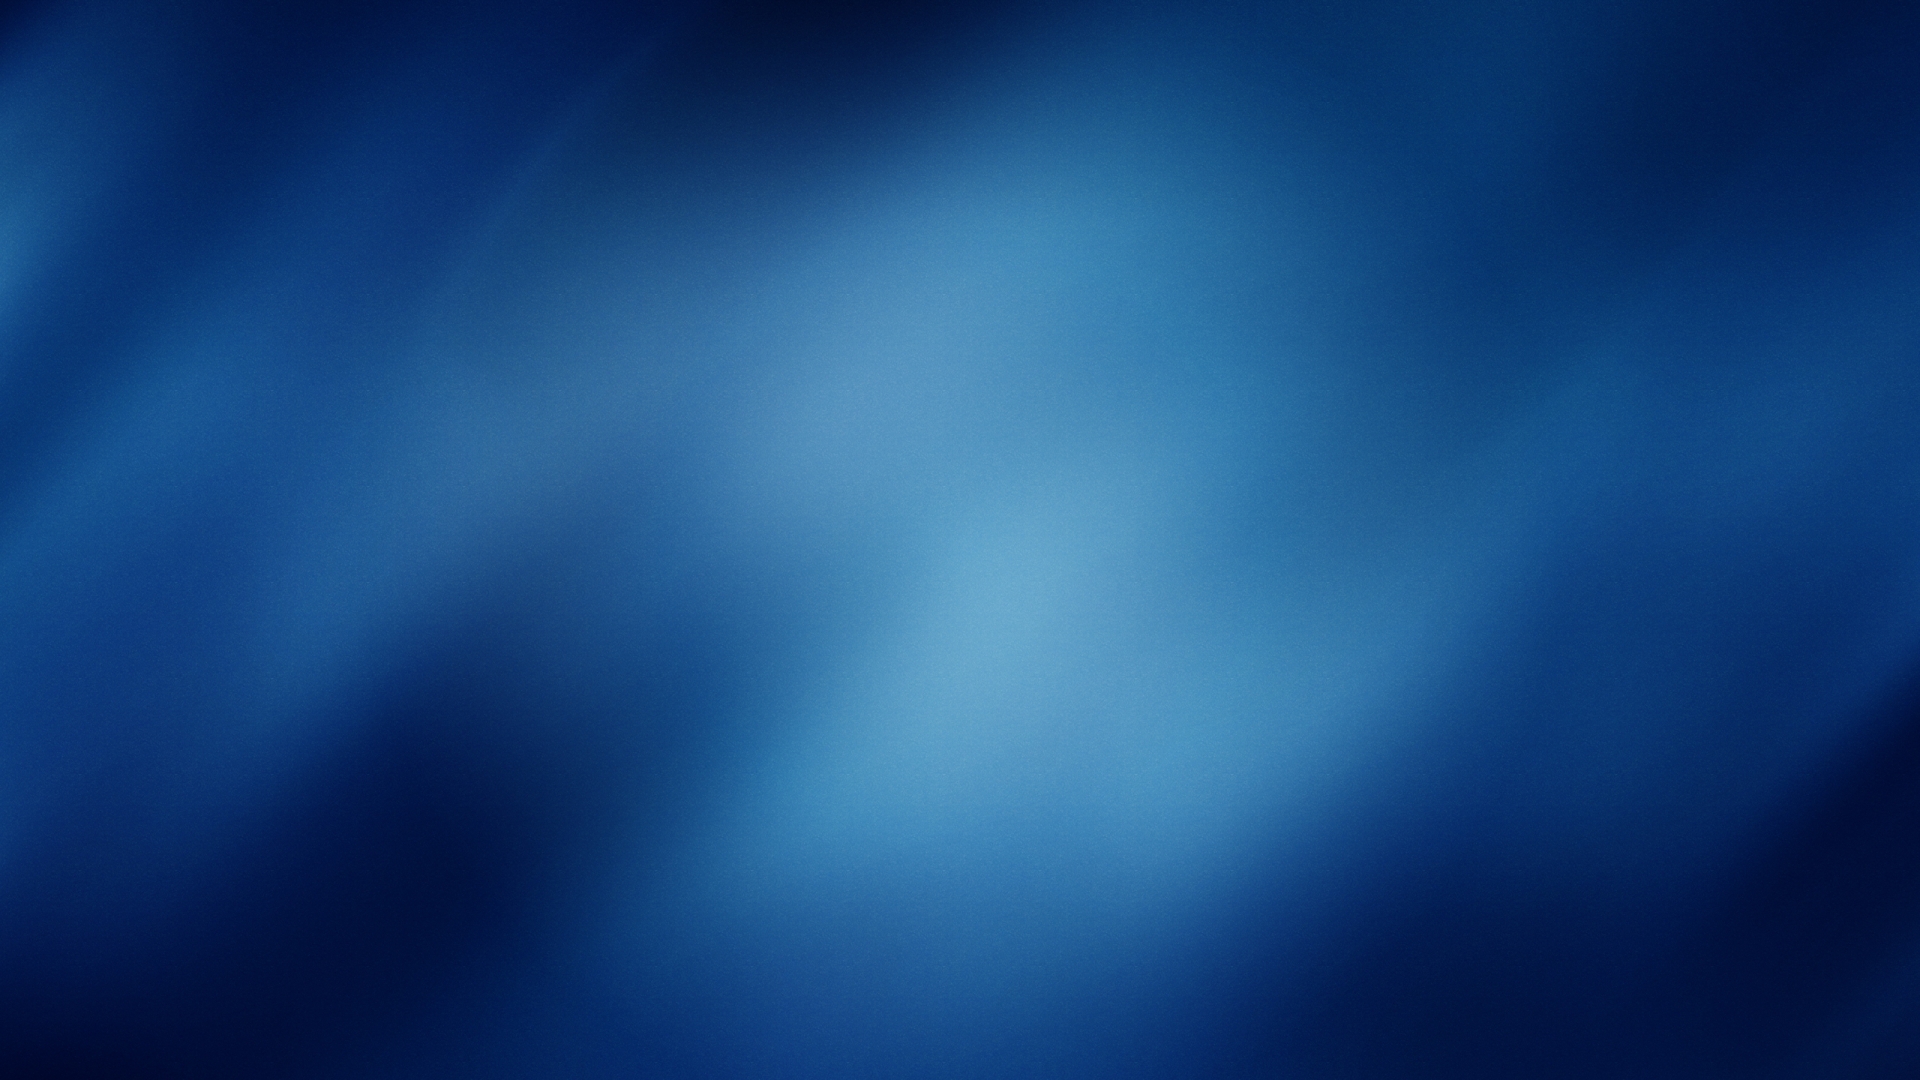 Abstract Blue Gradient Wallpaper In 3d